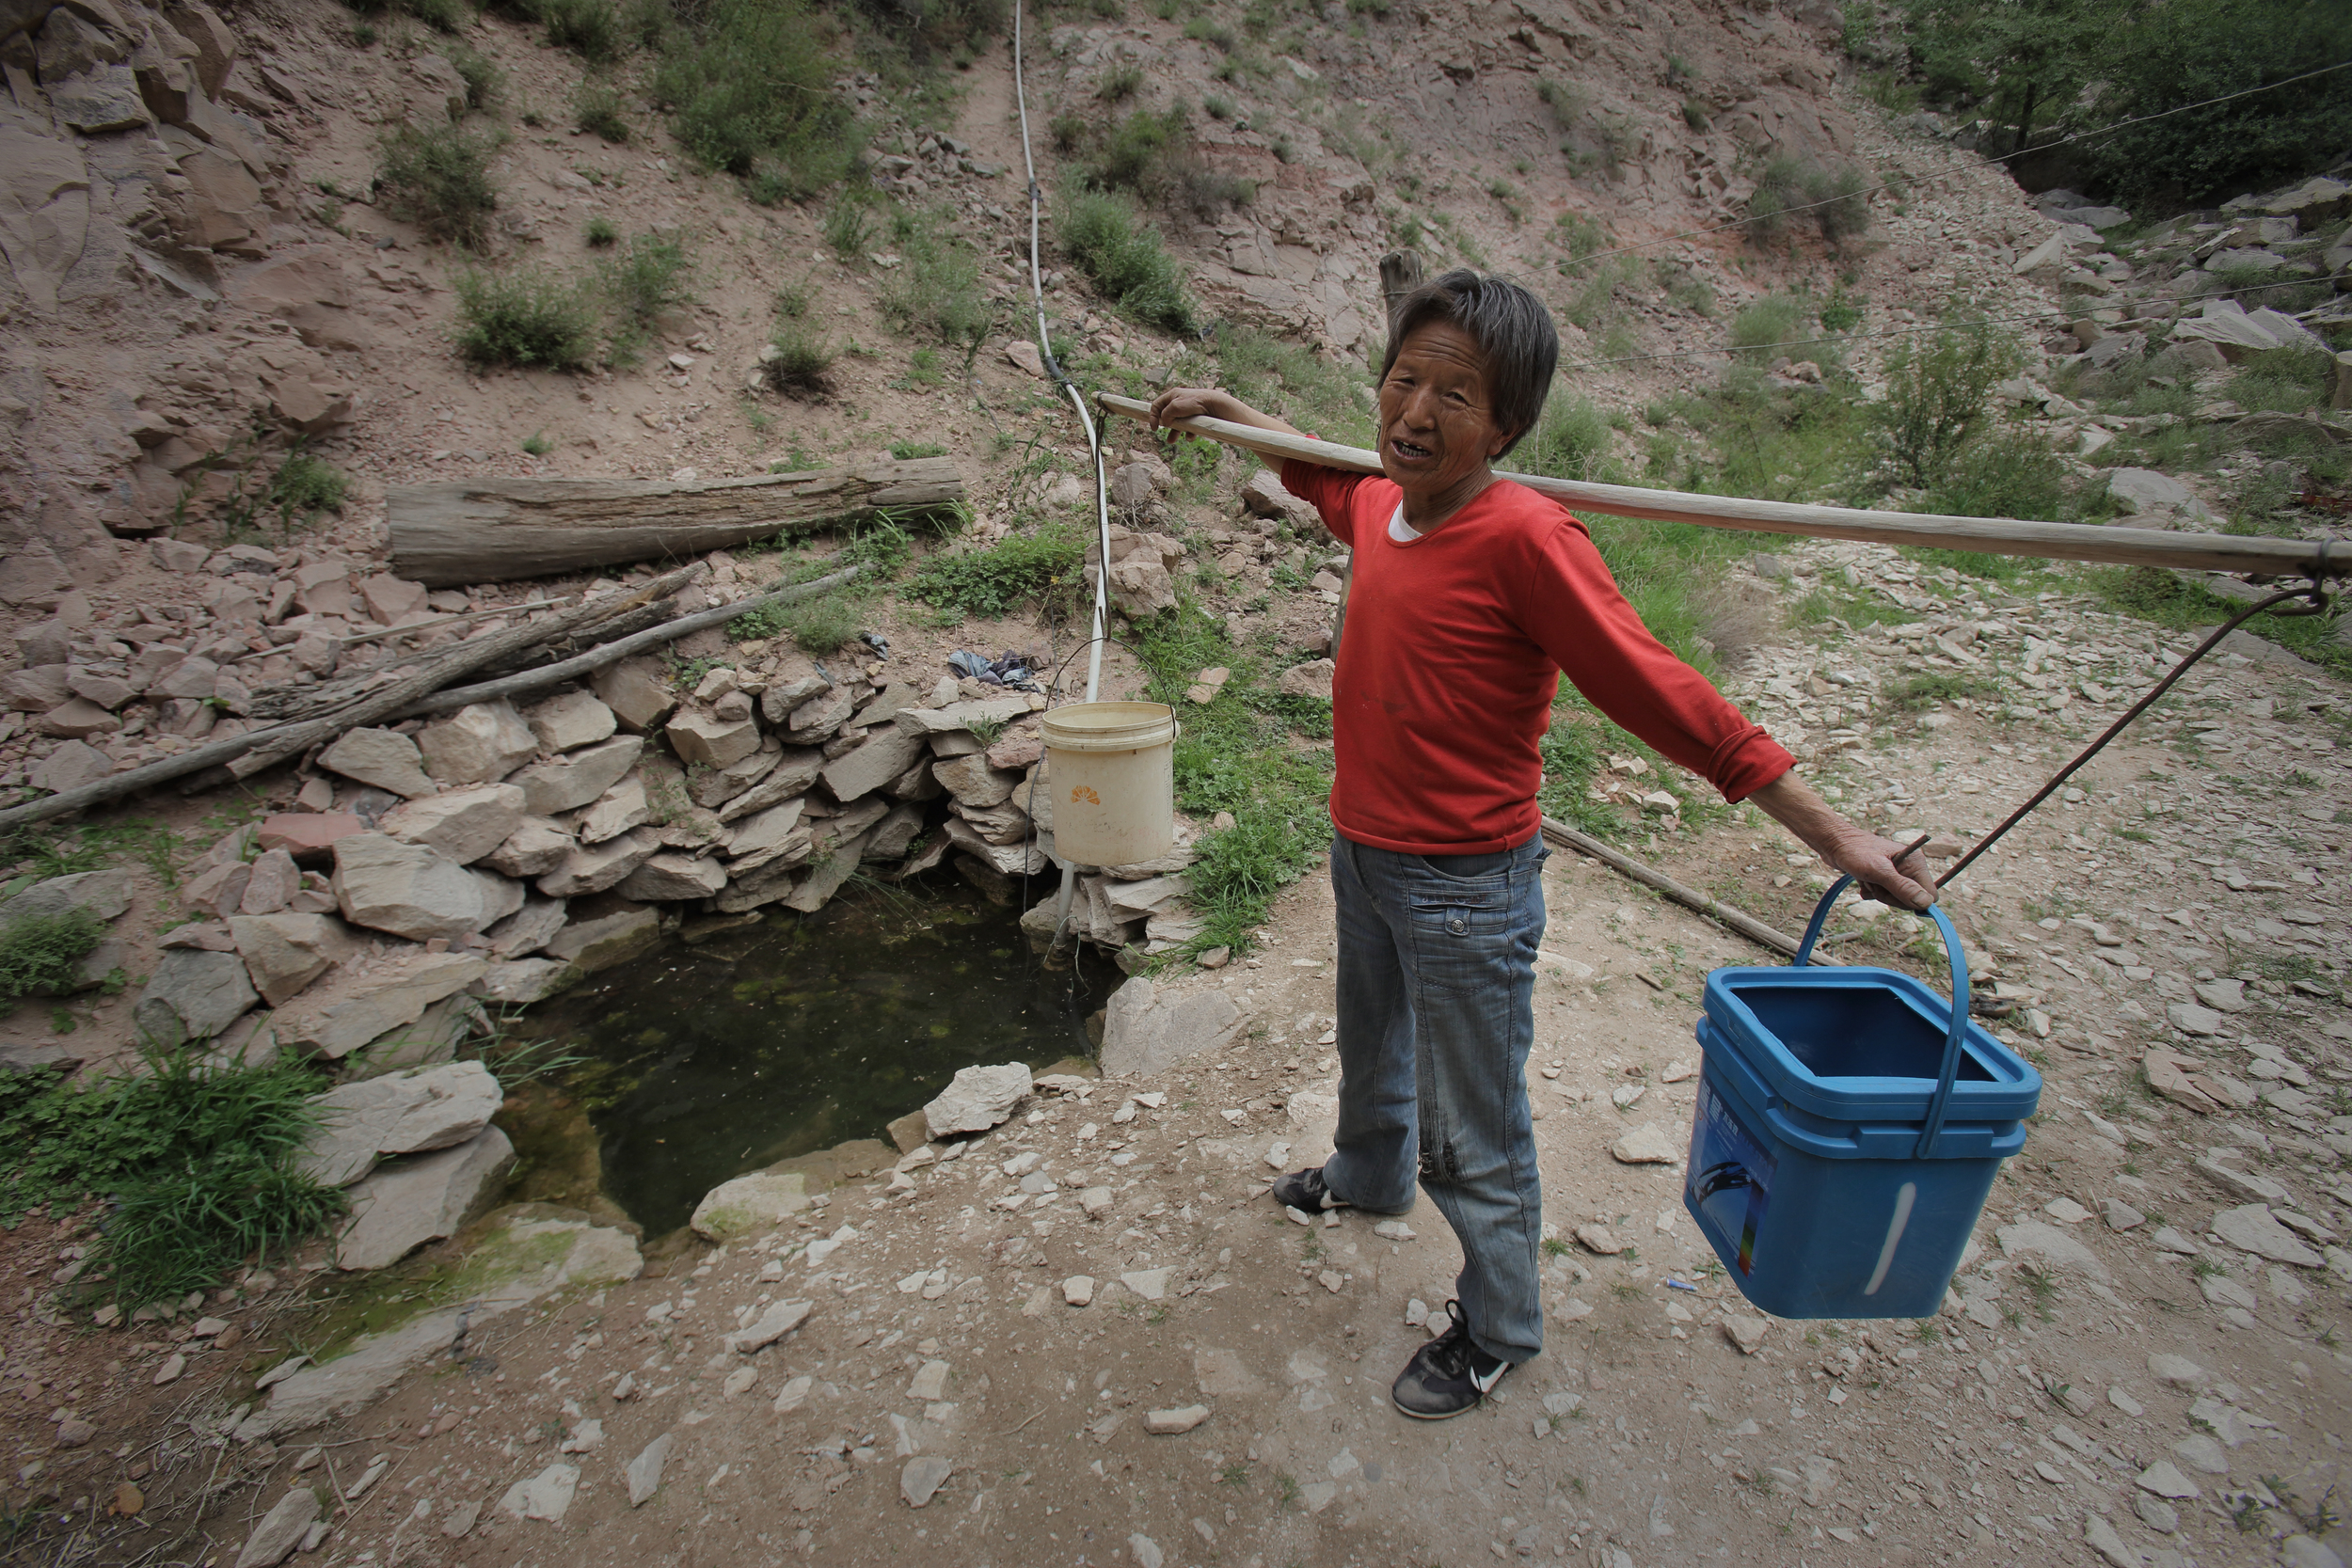 <p>A woman collects water from a spring in a valley outside her village of Houjialiang in northwestern China, where coal mining has poisoned local rivers and streams (Image by Qiu Bo / Greenpeace)</p>